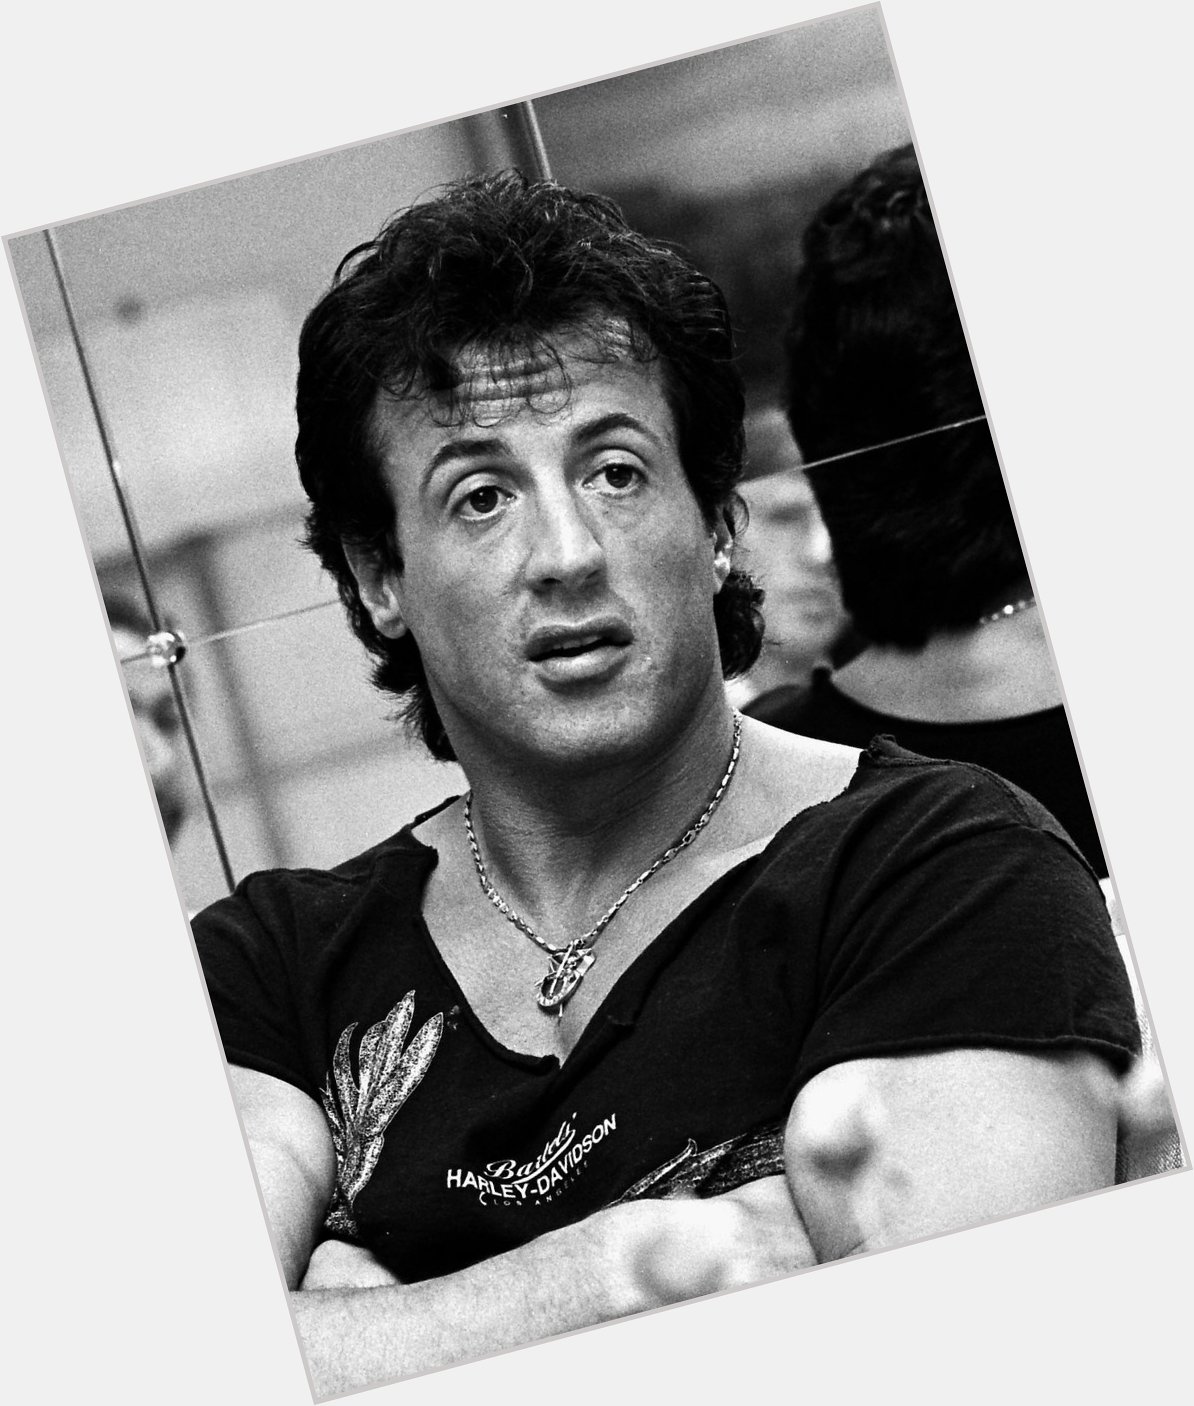 Happy Birthday Sly Stallone! Celebrate with Movies as we look at his top 5 action roles.  